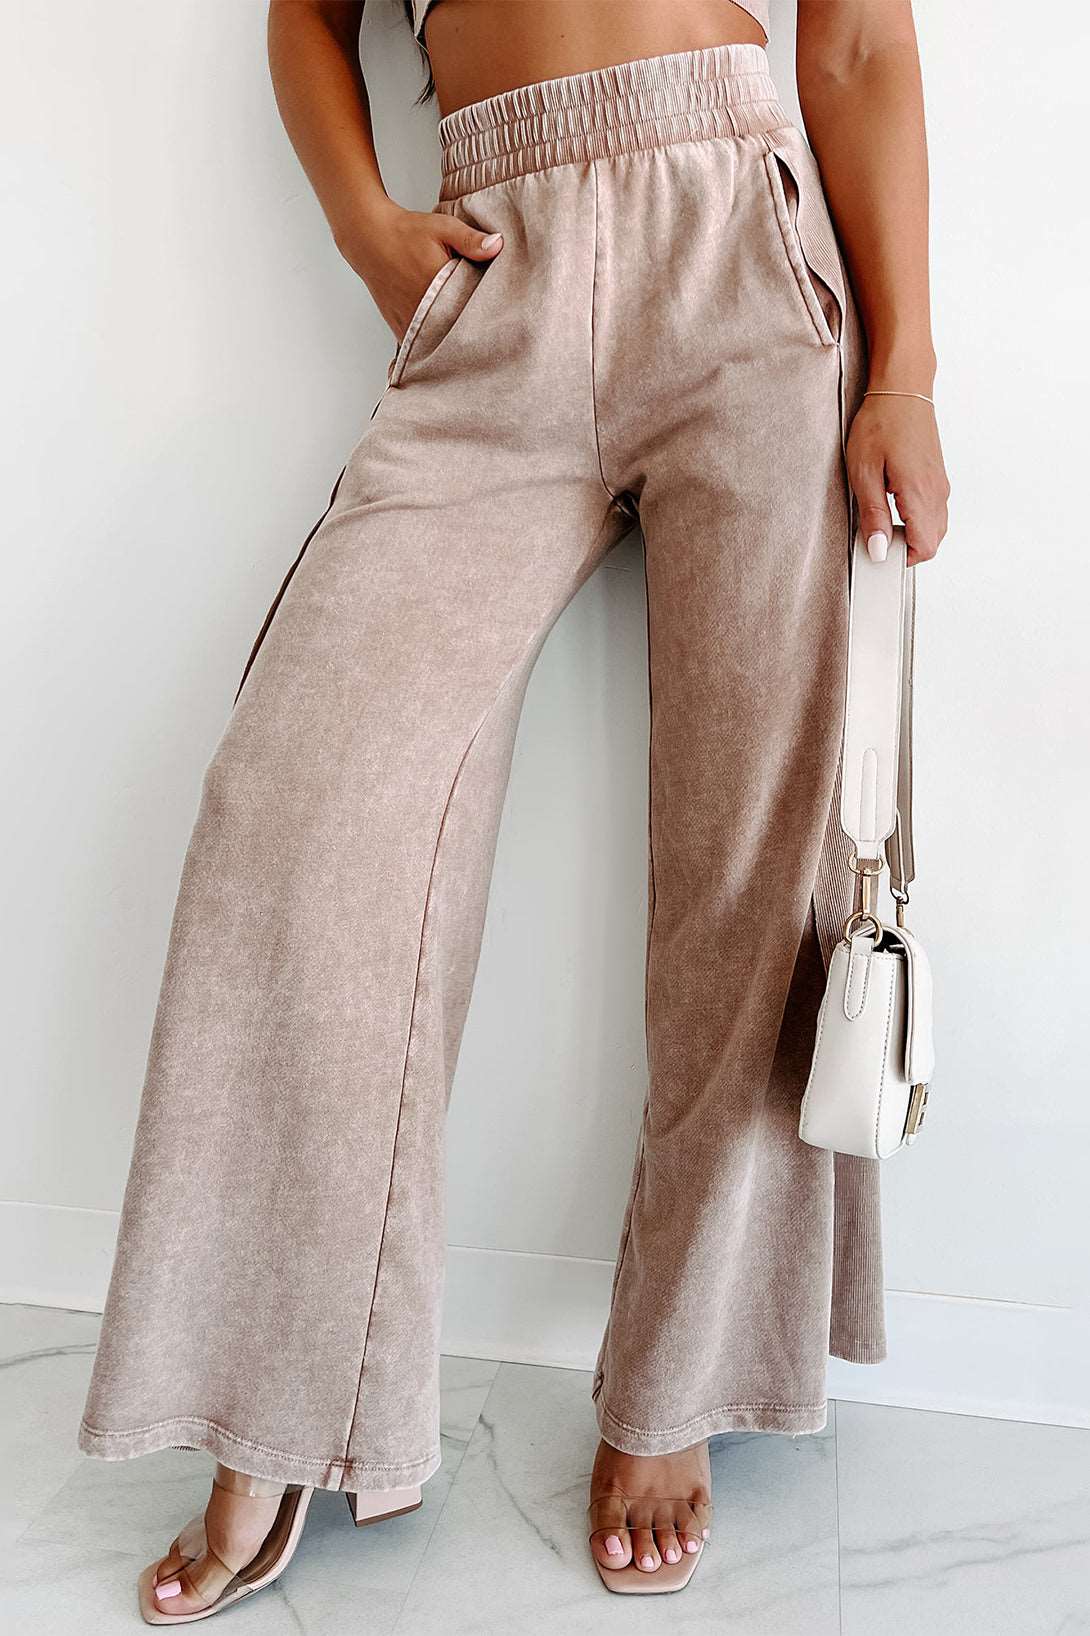 Apricot Pink Mineral Washed Smocked Wide Leg Pants - Bellisima Clothing Collective